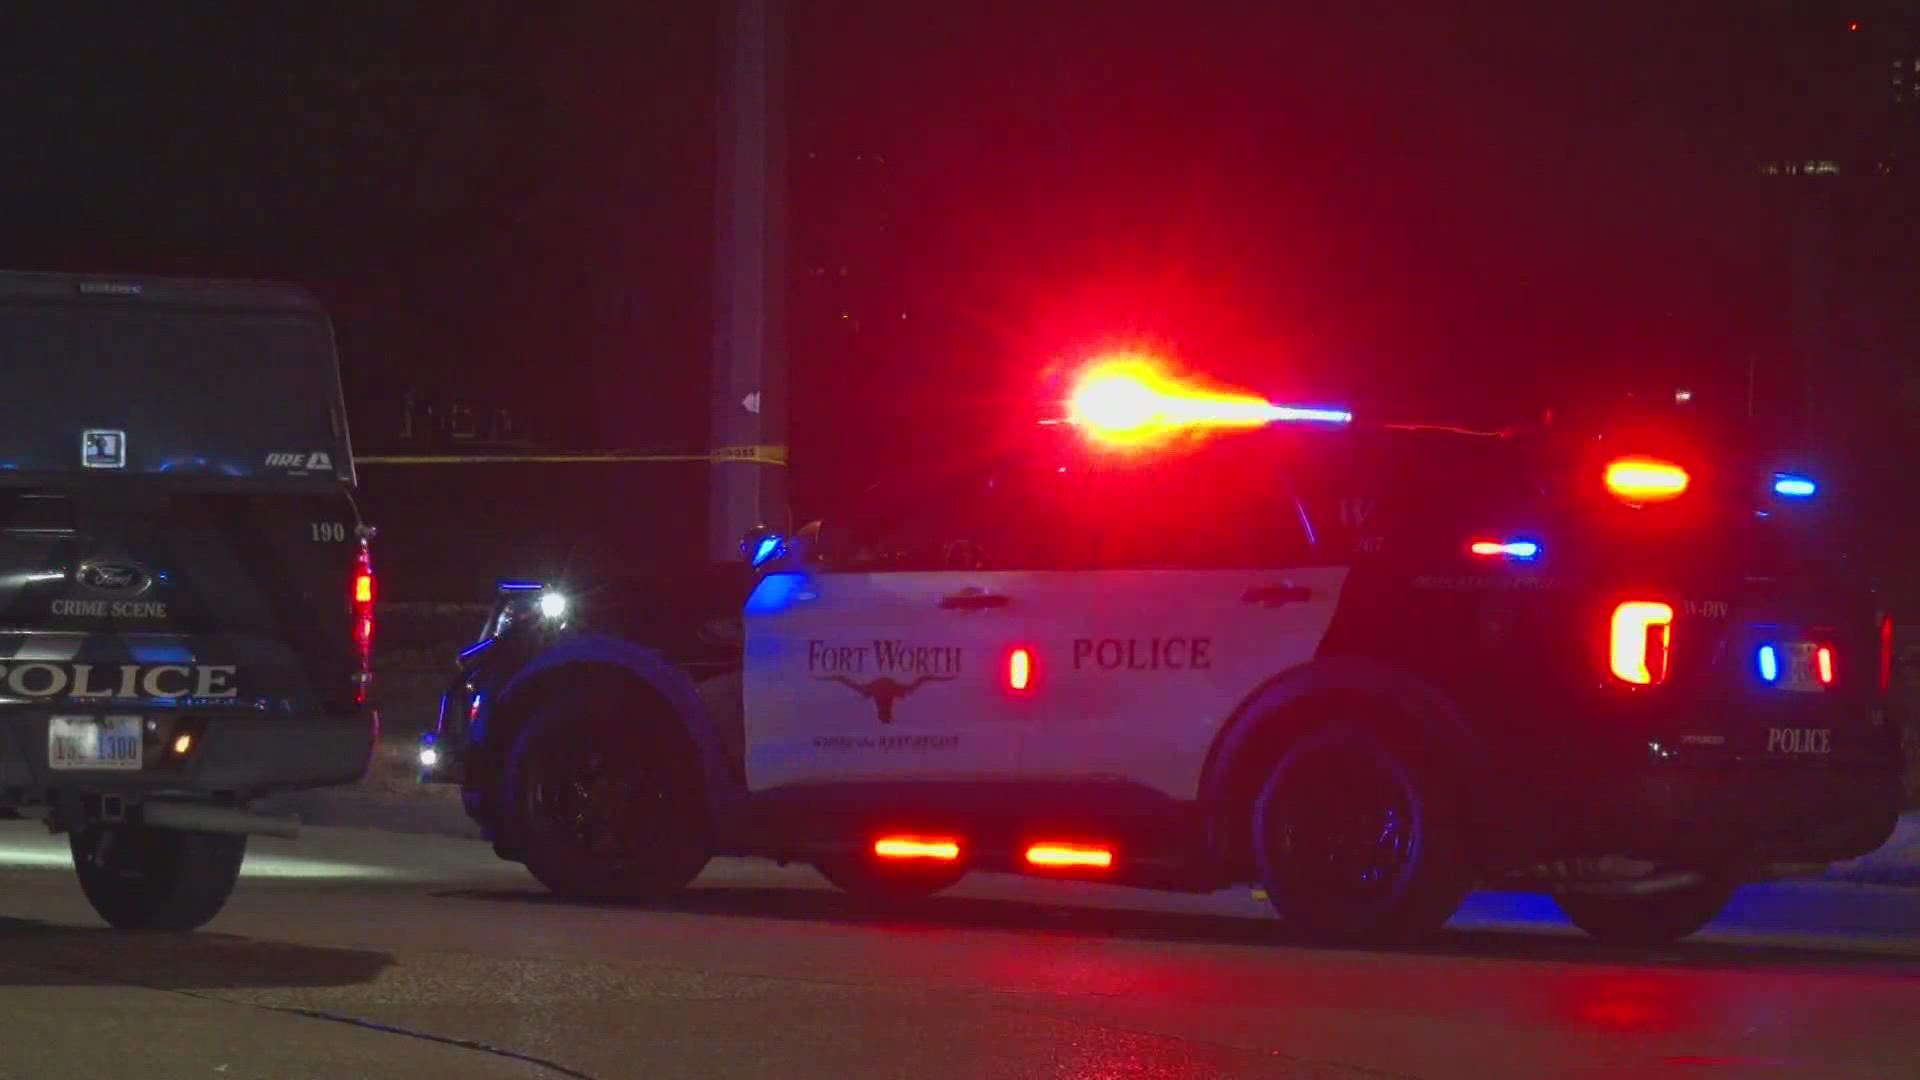 A 43-year-old man was shot and killed at the scene of a car accident in Fort Worth.